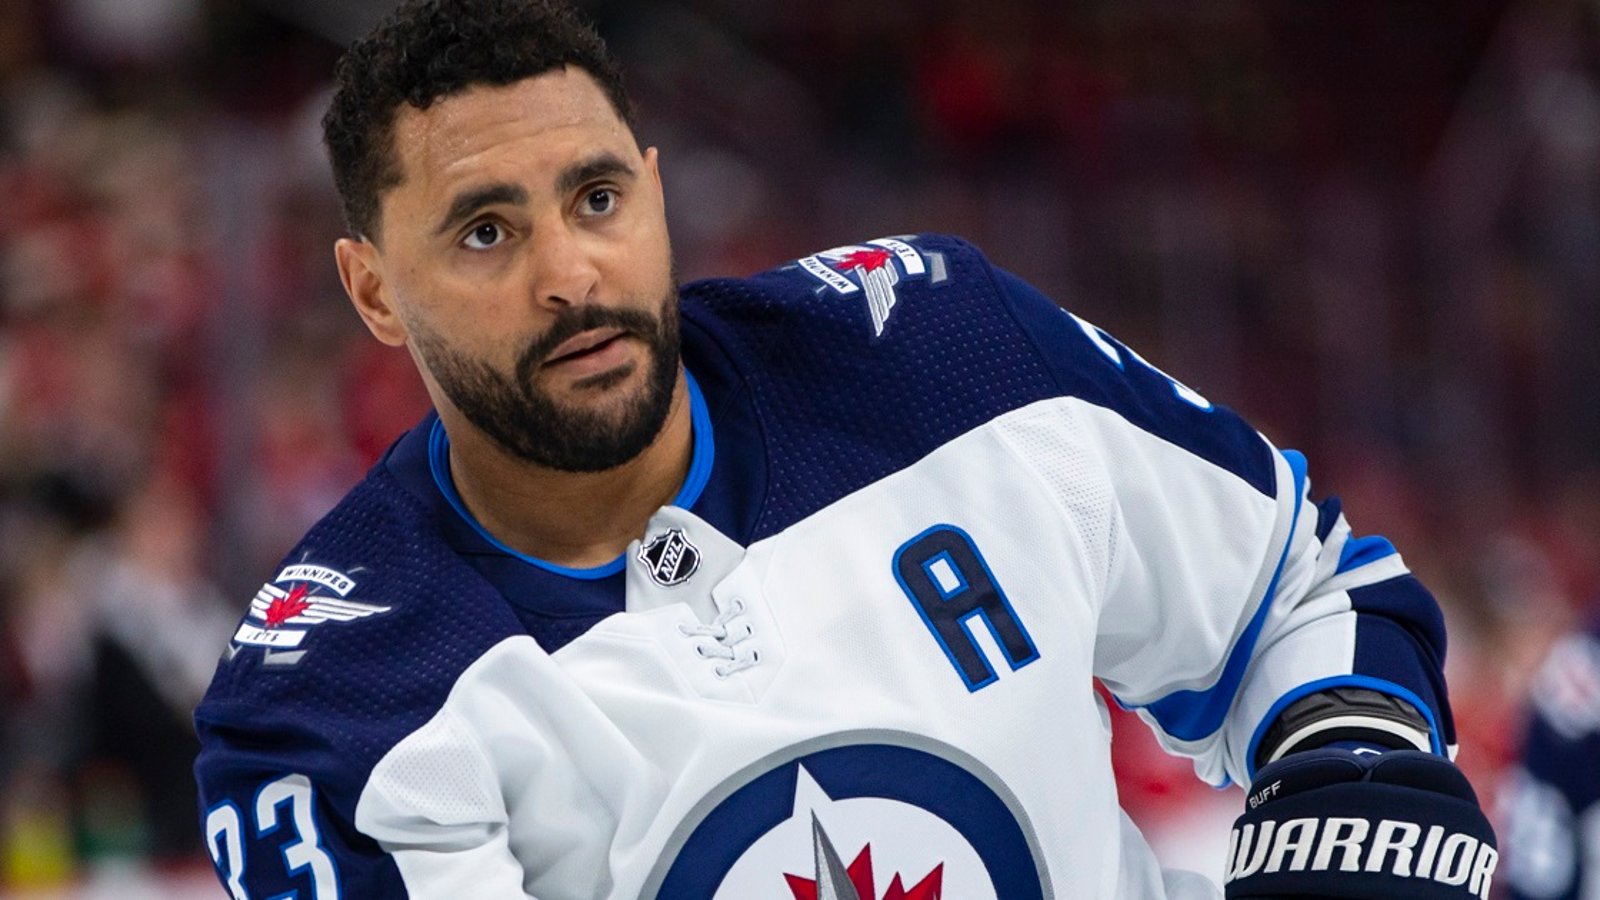 Kevin Cheveldayoff hints at mystery motivation behind Dustin Byfuglien's decisions.